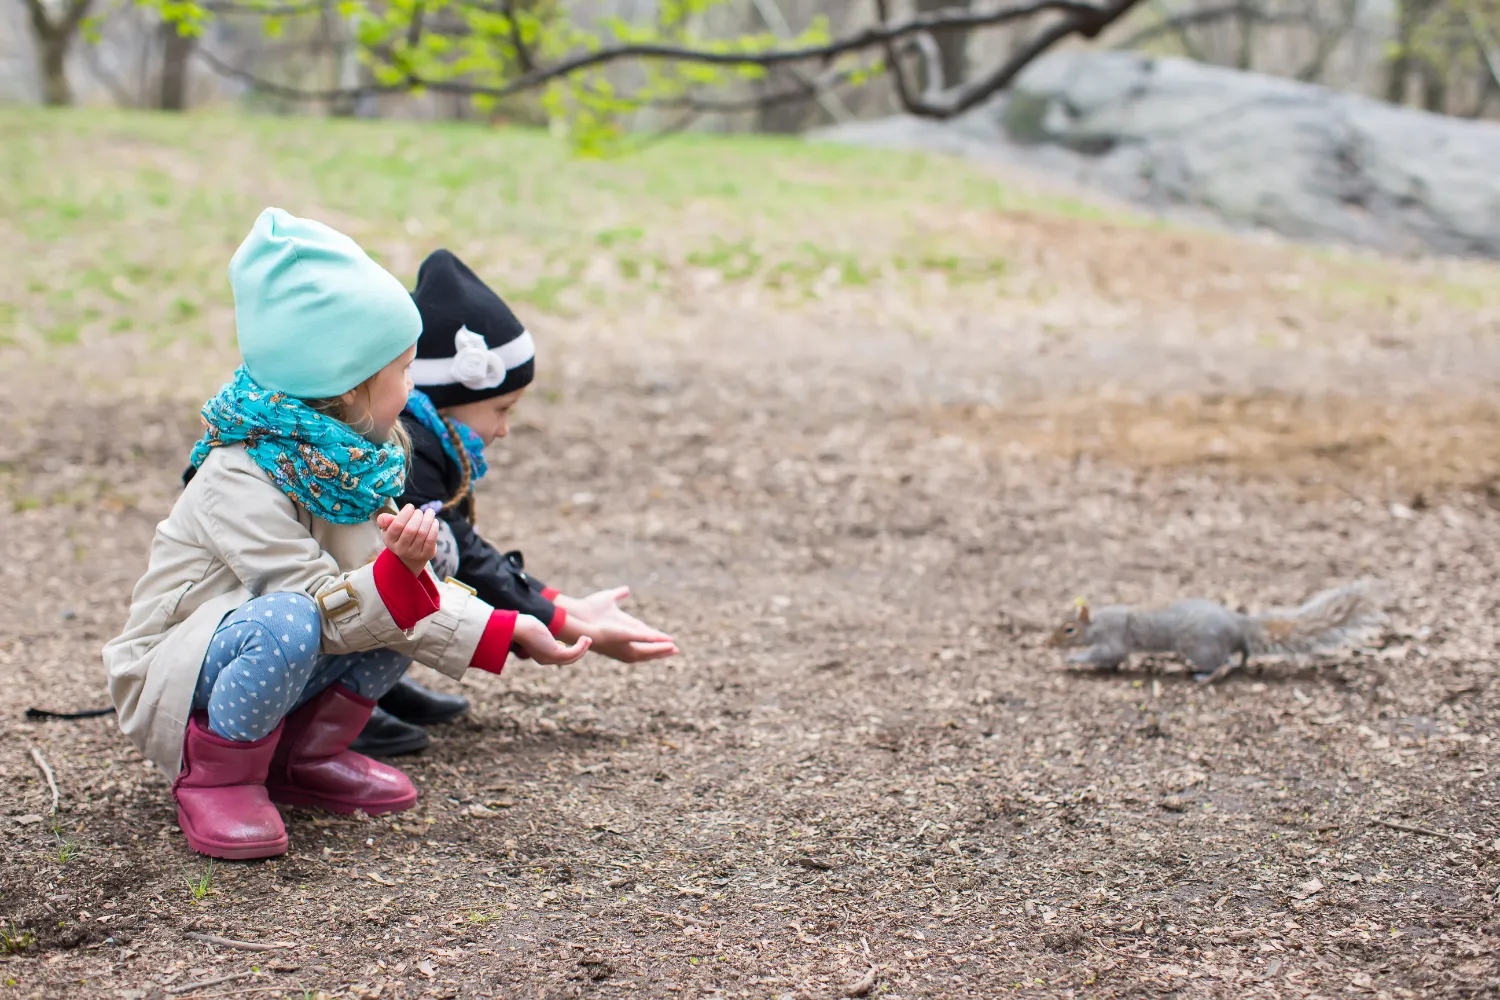 Girls feeds a squirrel in central park